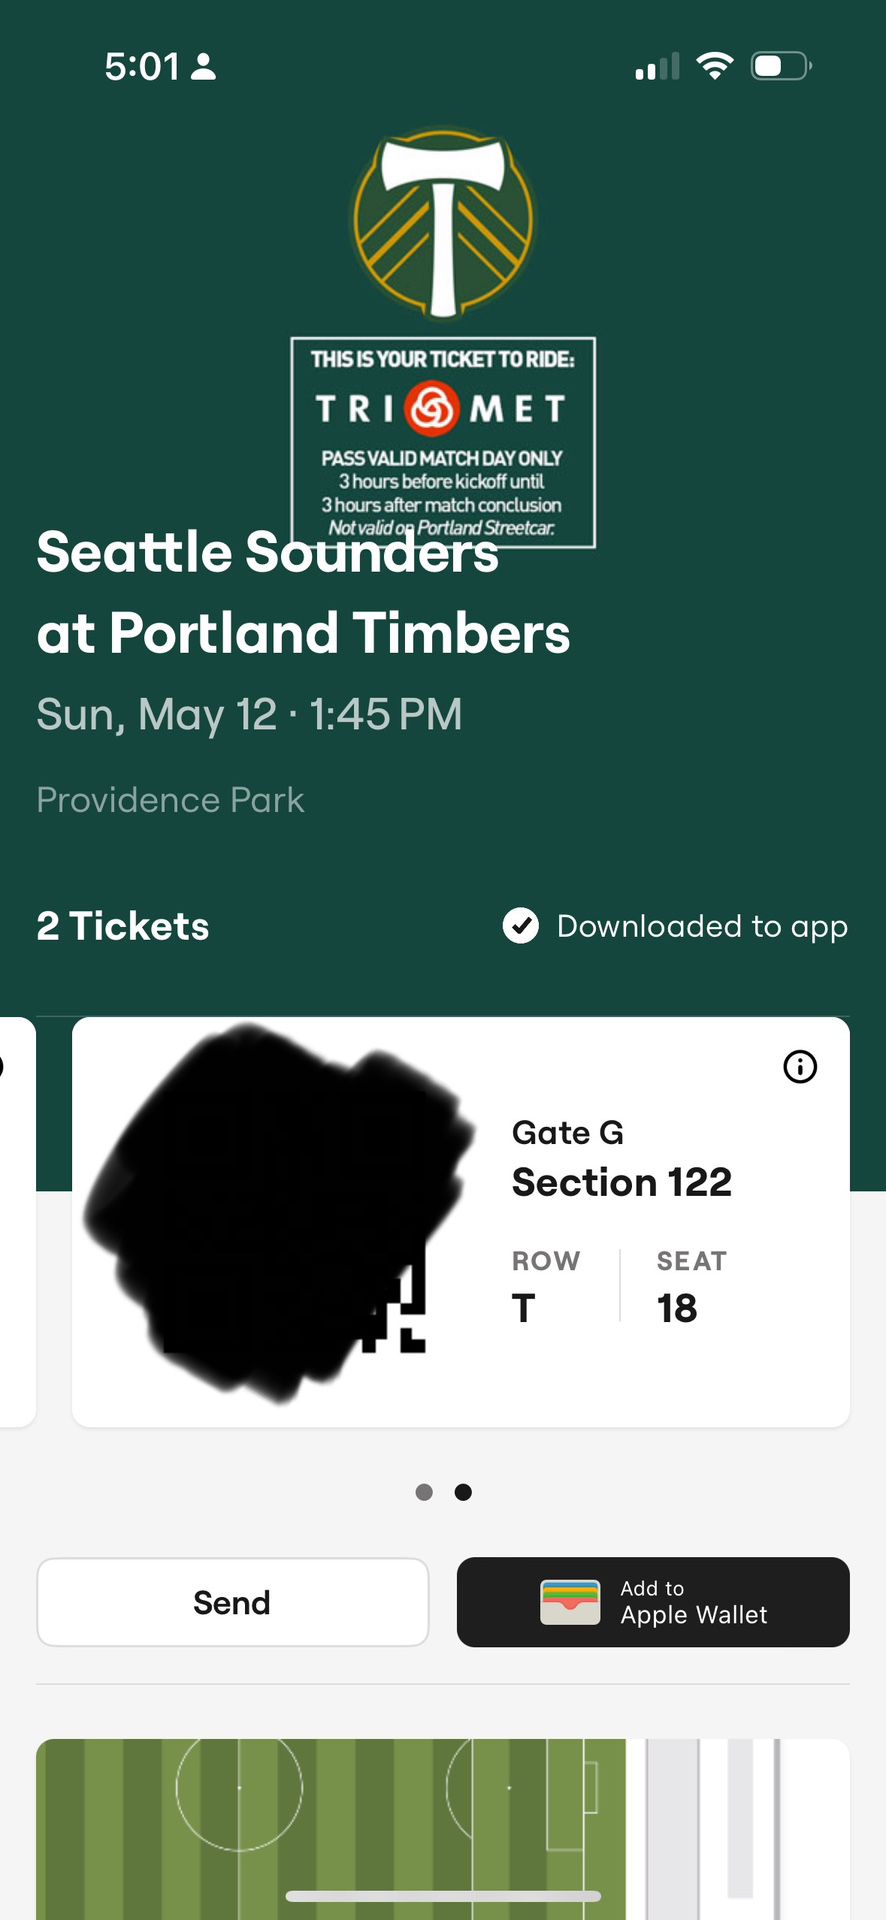 Timbers V sounders Section 122 - 2 Tickets